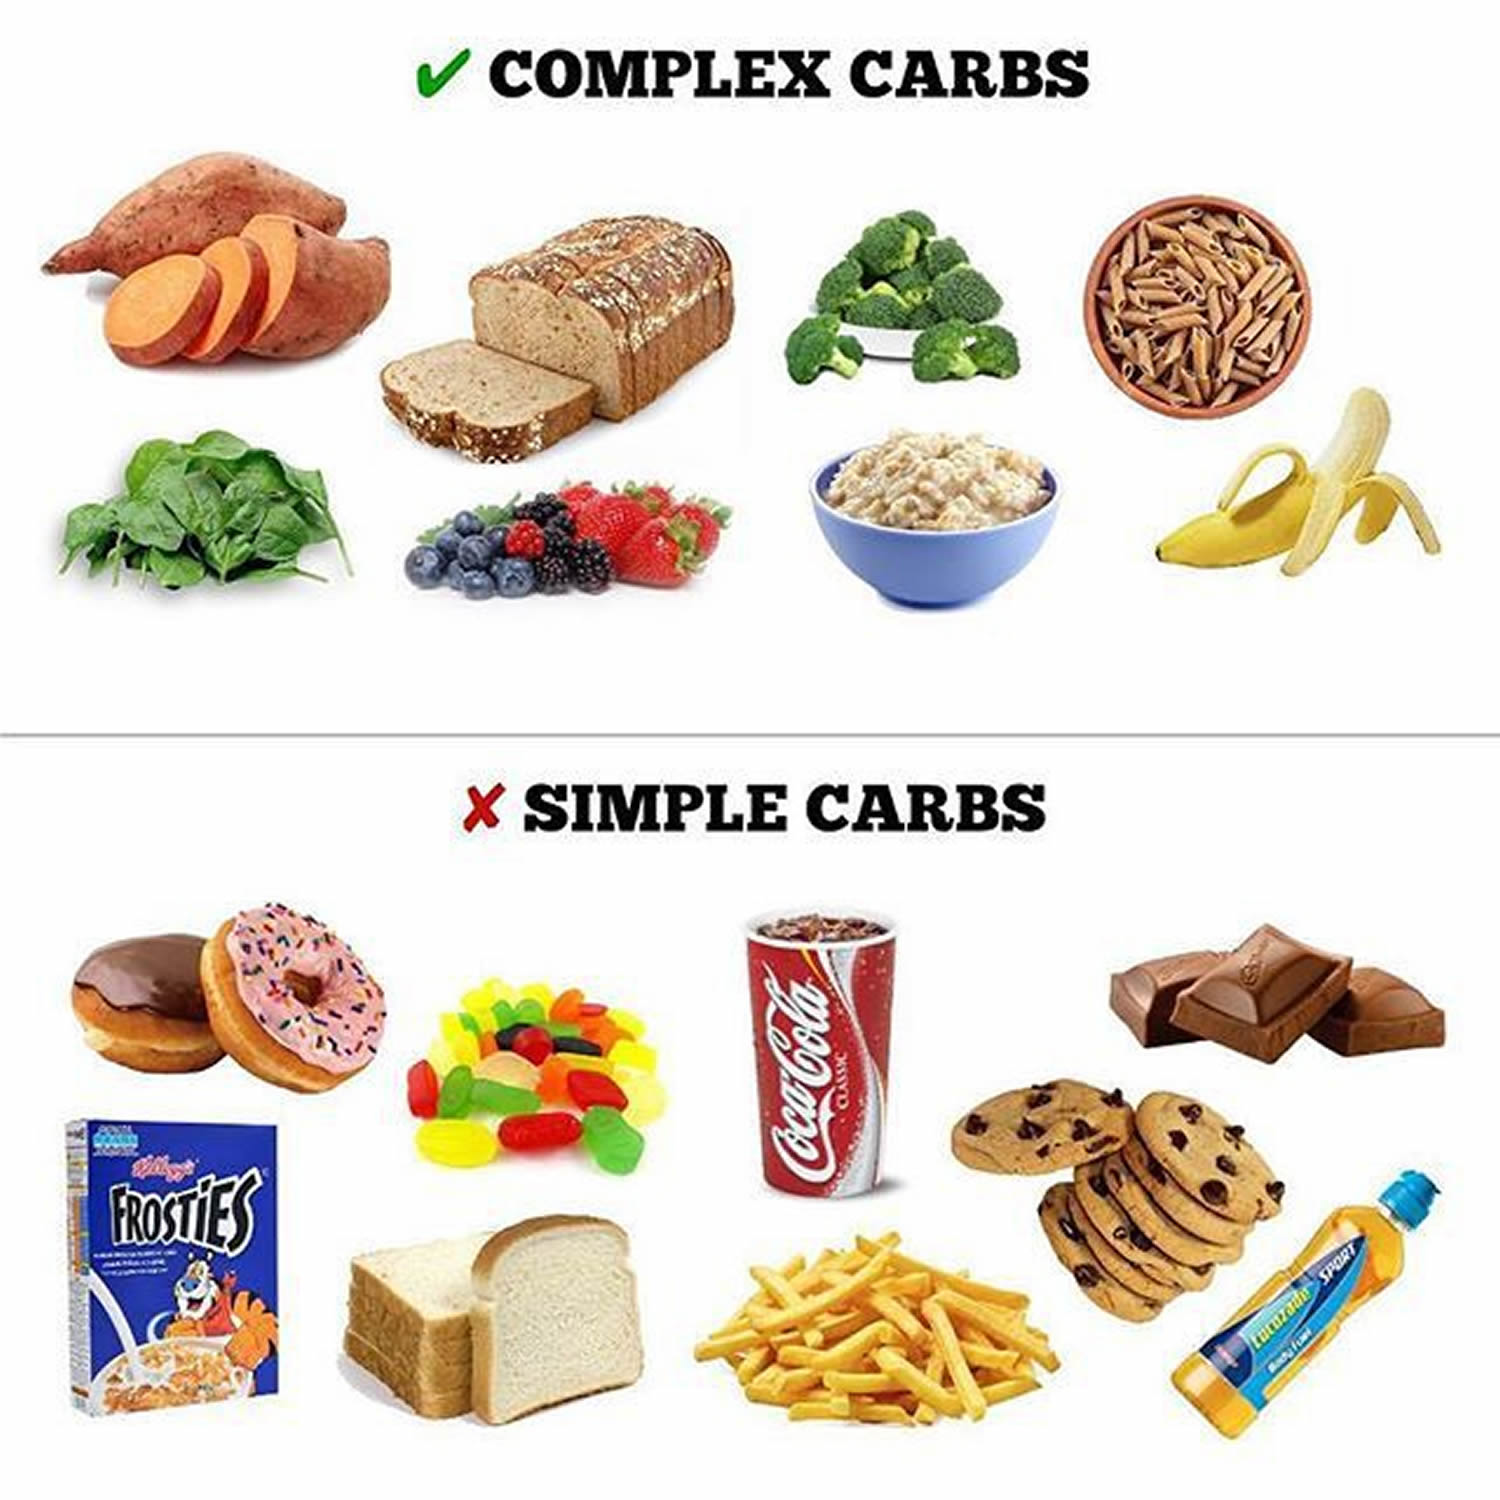 Best Carbs To Eat - Best Source of Complex Carbs - For Weight Loss